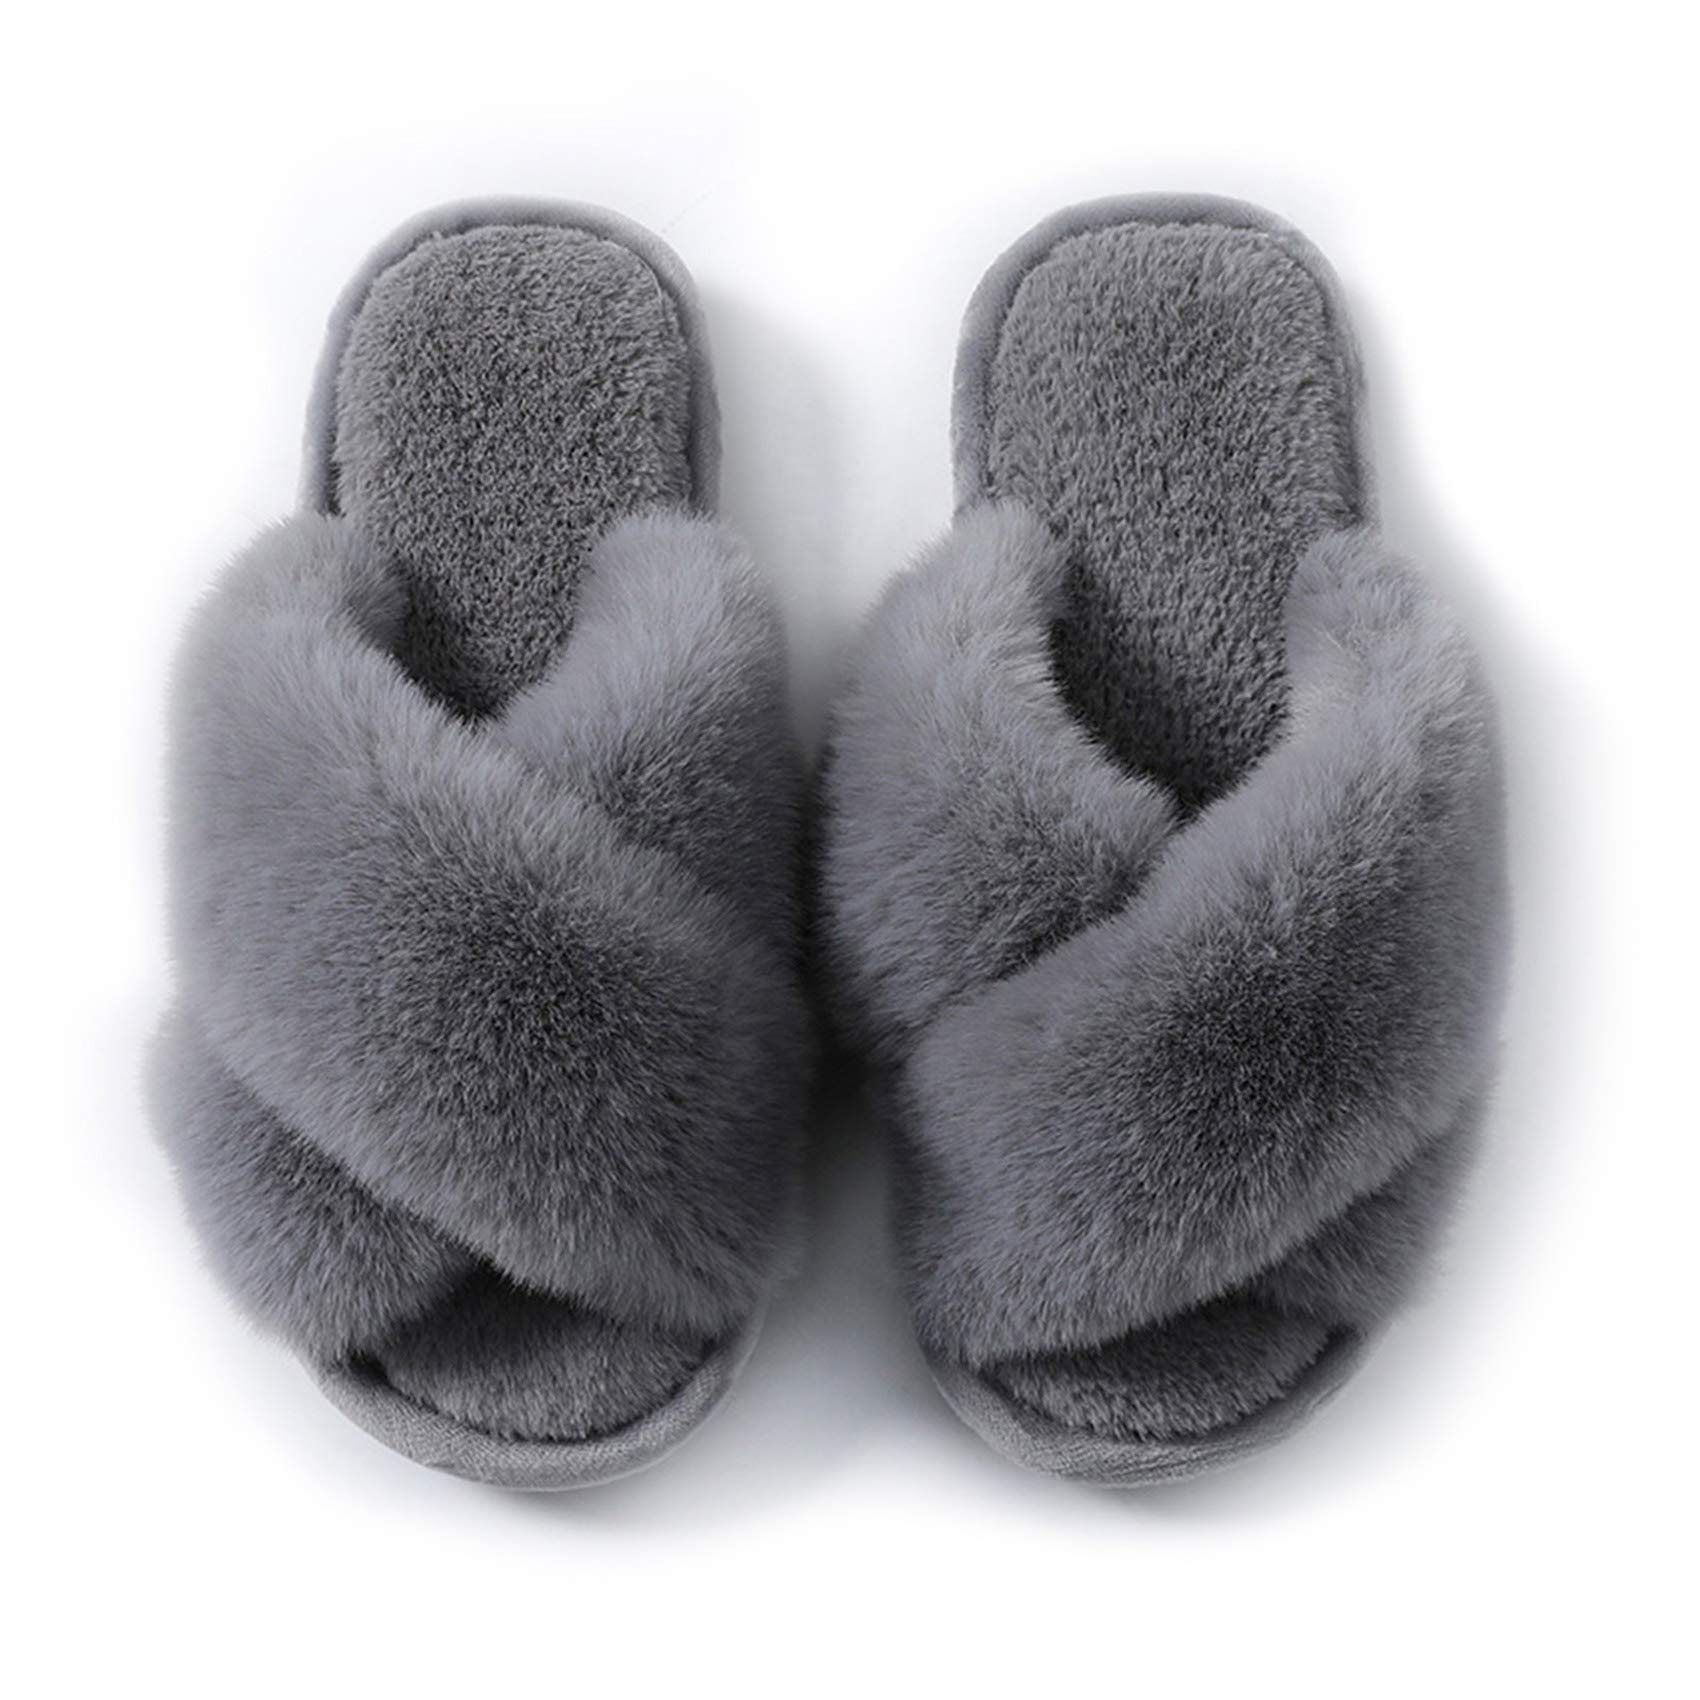 8 Bedroom Slippers to Wear Out of the House | Vogue